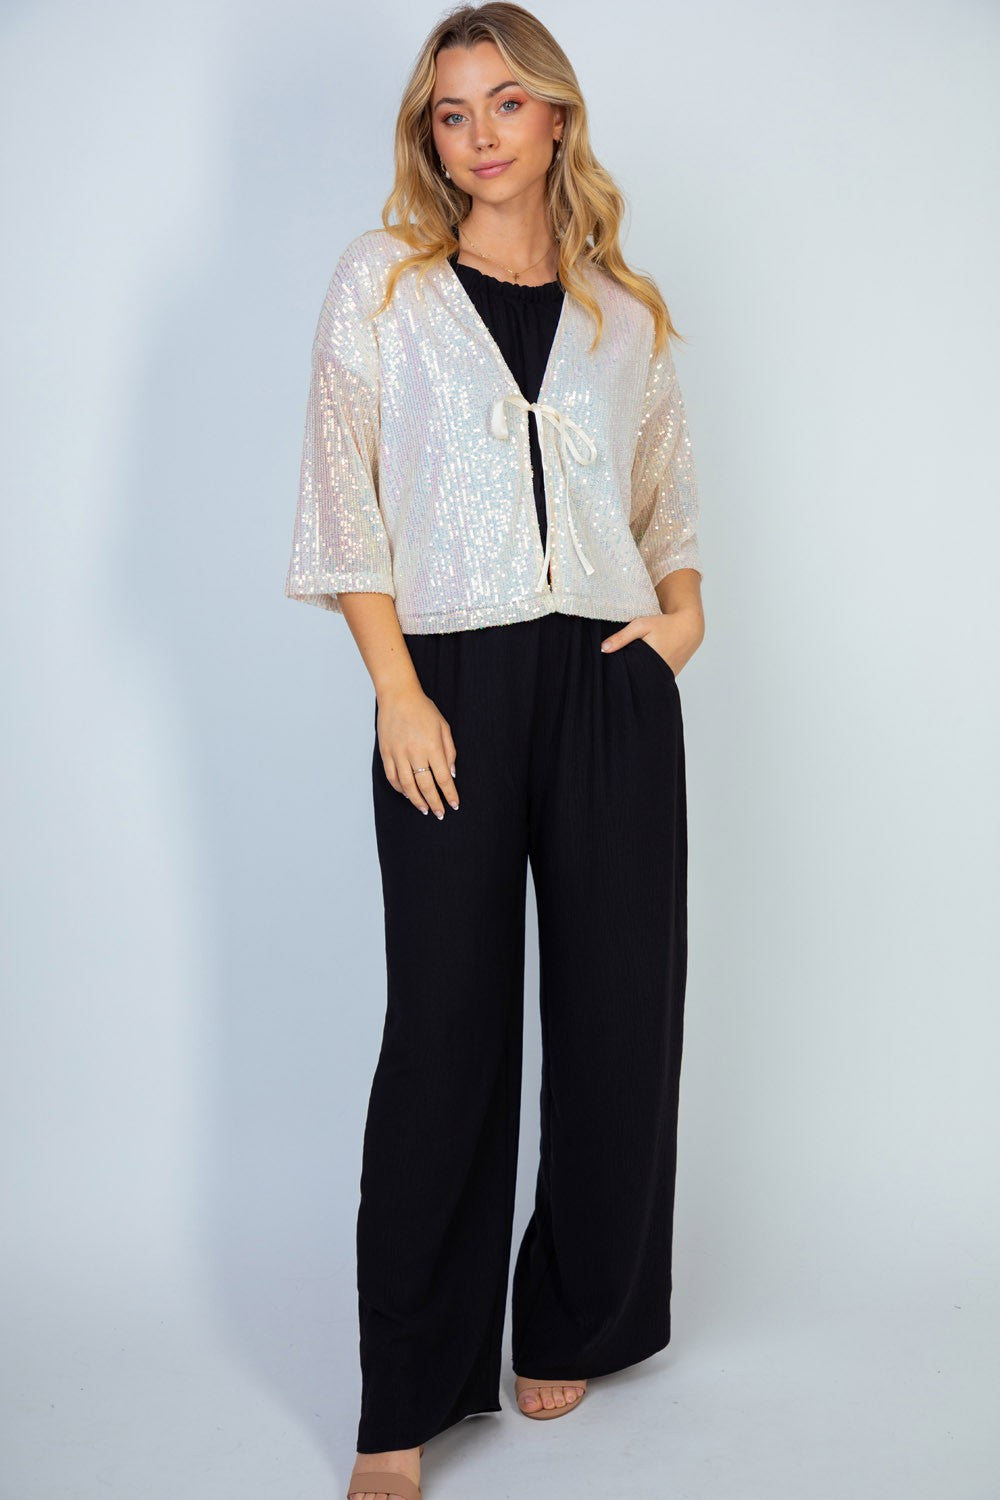 Here For The Party Top - Nude sequin, bolero, shrug, plus size